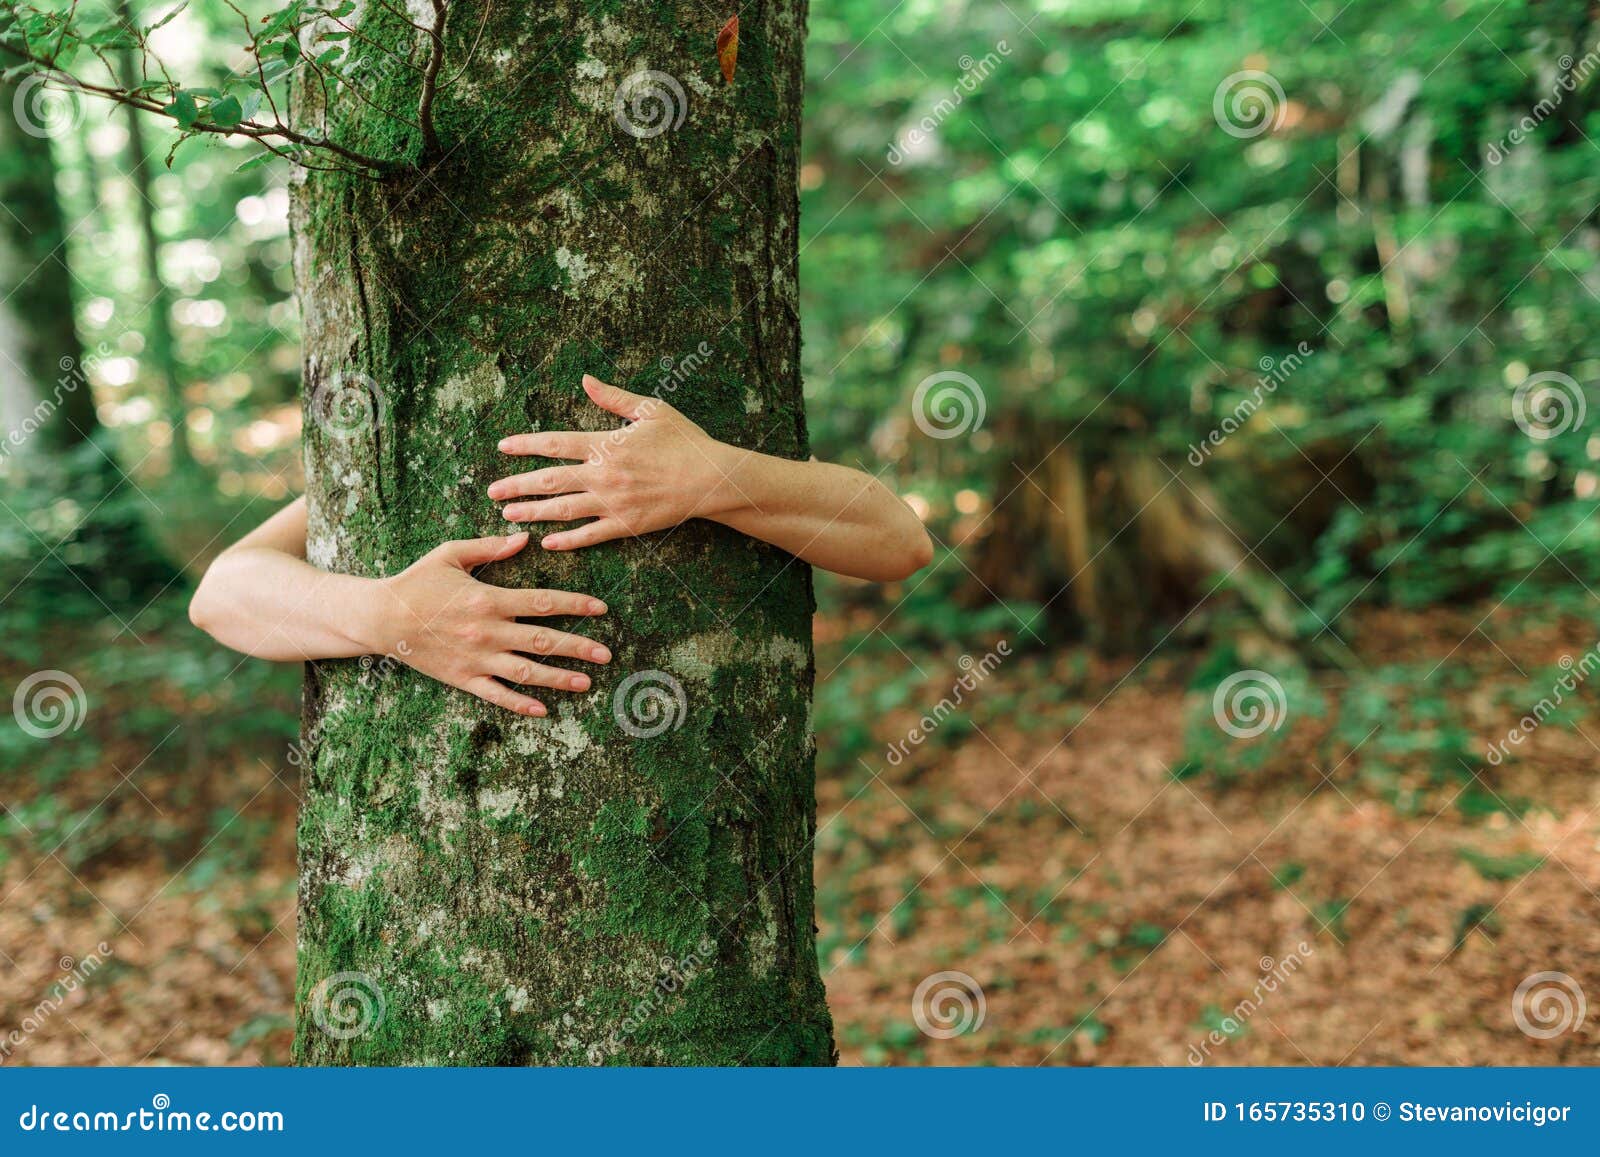 environmentalist tree hugger is hugging wood trunk in forest